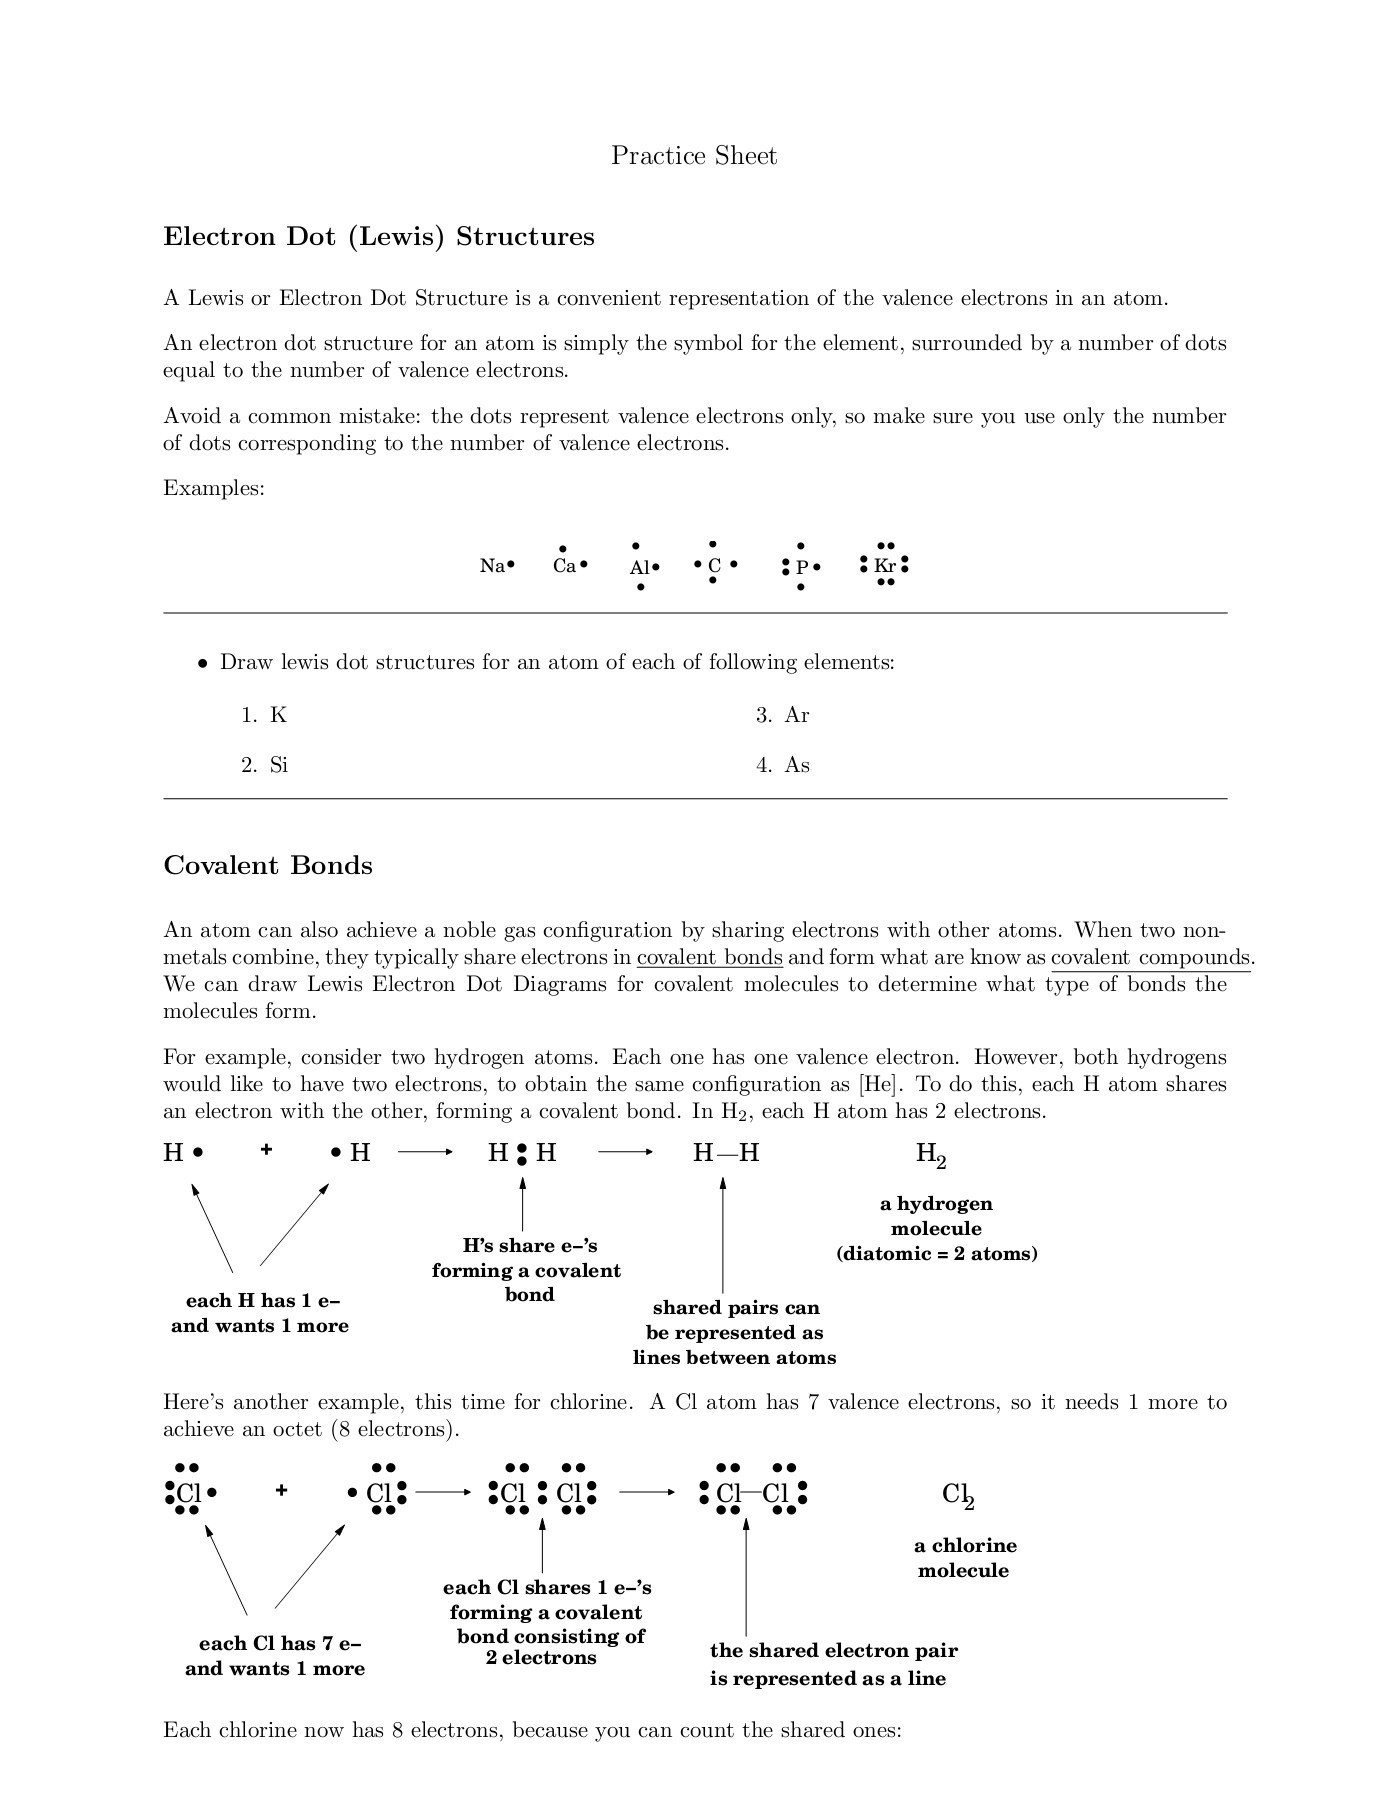 Lewis Structures Worksheet with Answers Electron Dot Lewis Structures Pages 1 4 Text Version